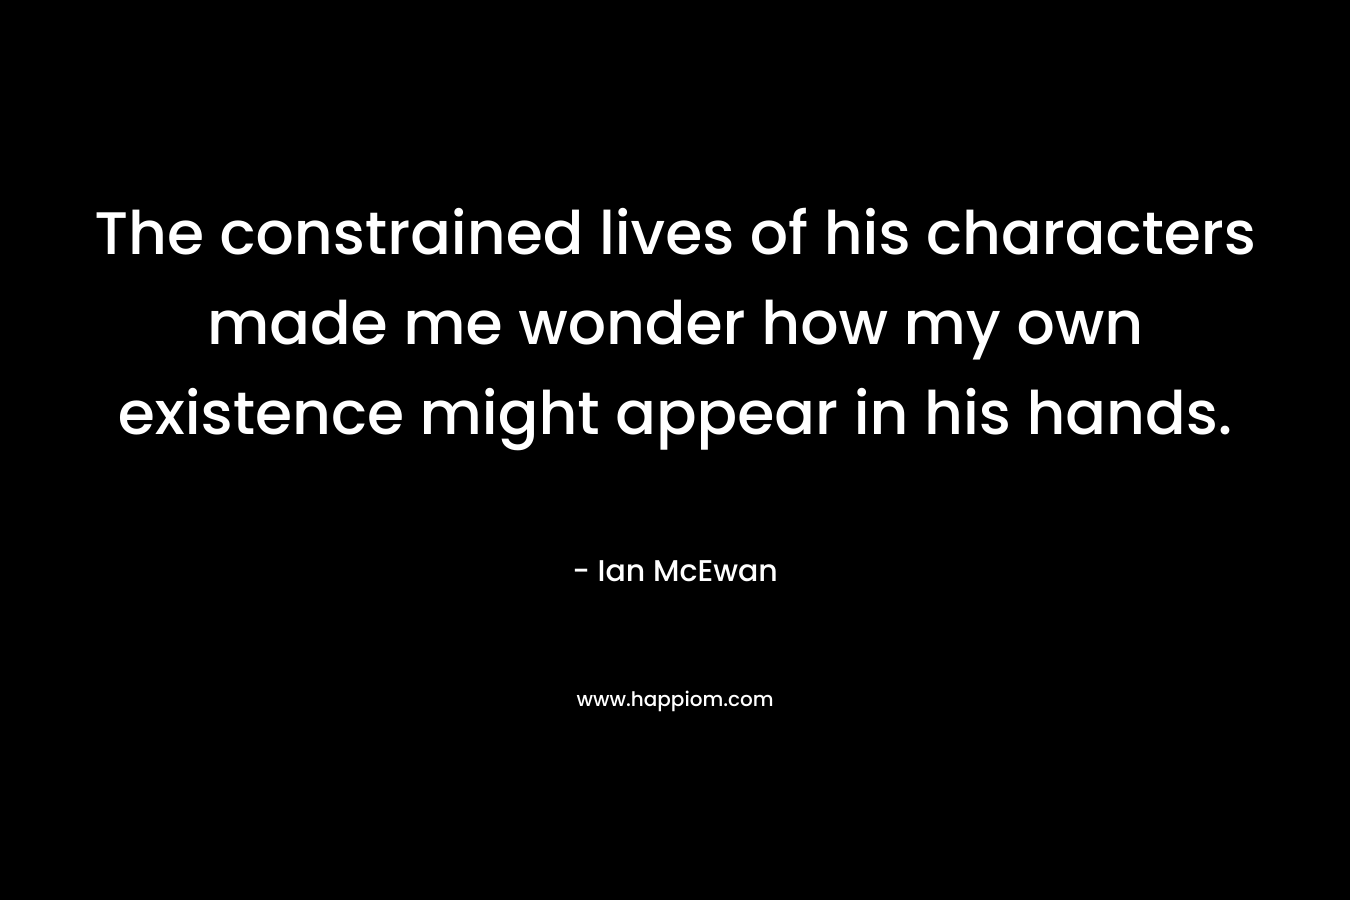 The constrained lives of his characters made me wonder how my own existence might appear in his hands. – Ian McEwan